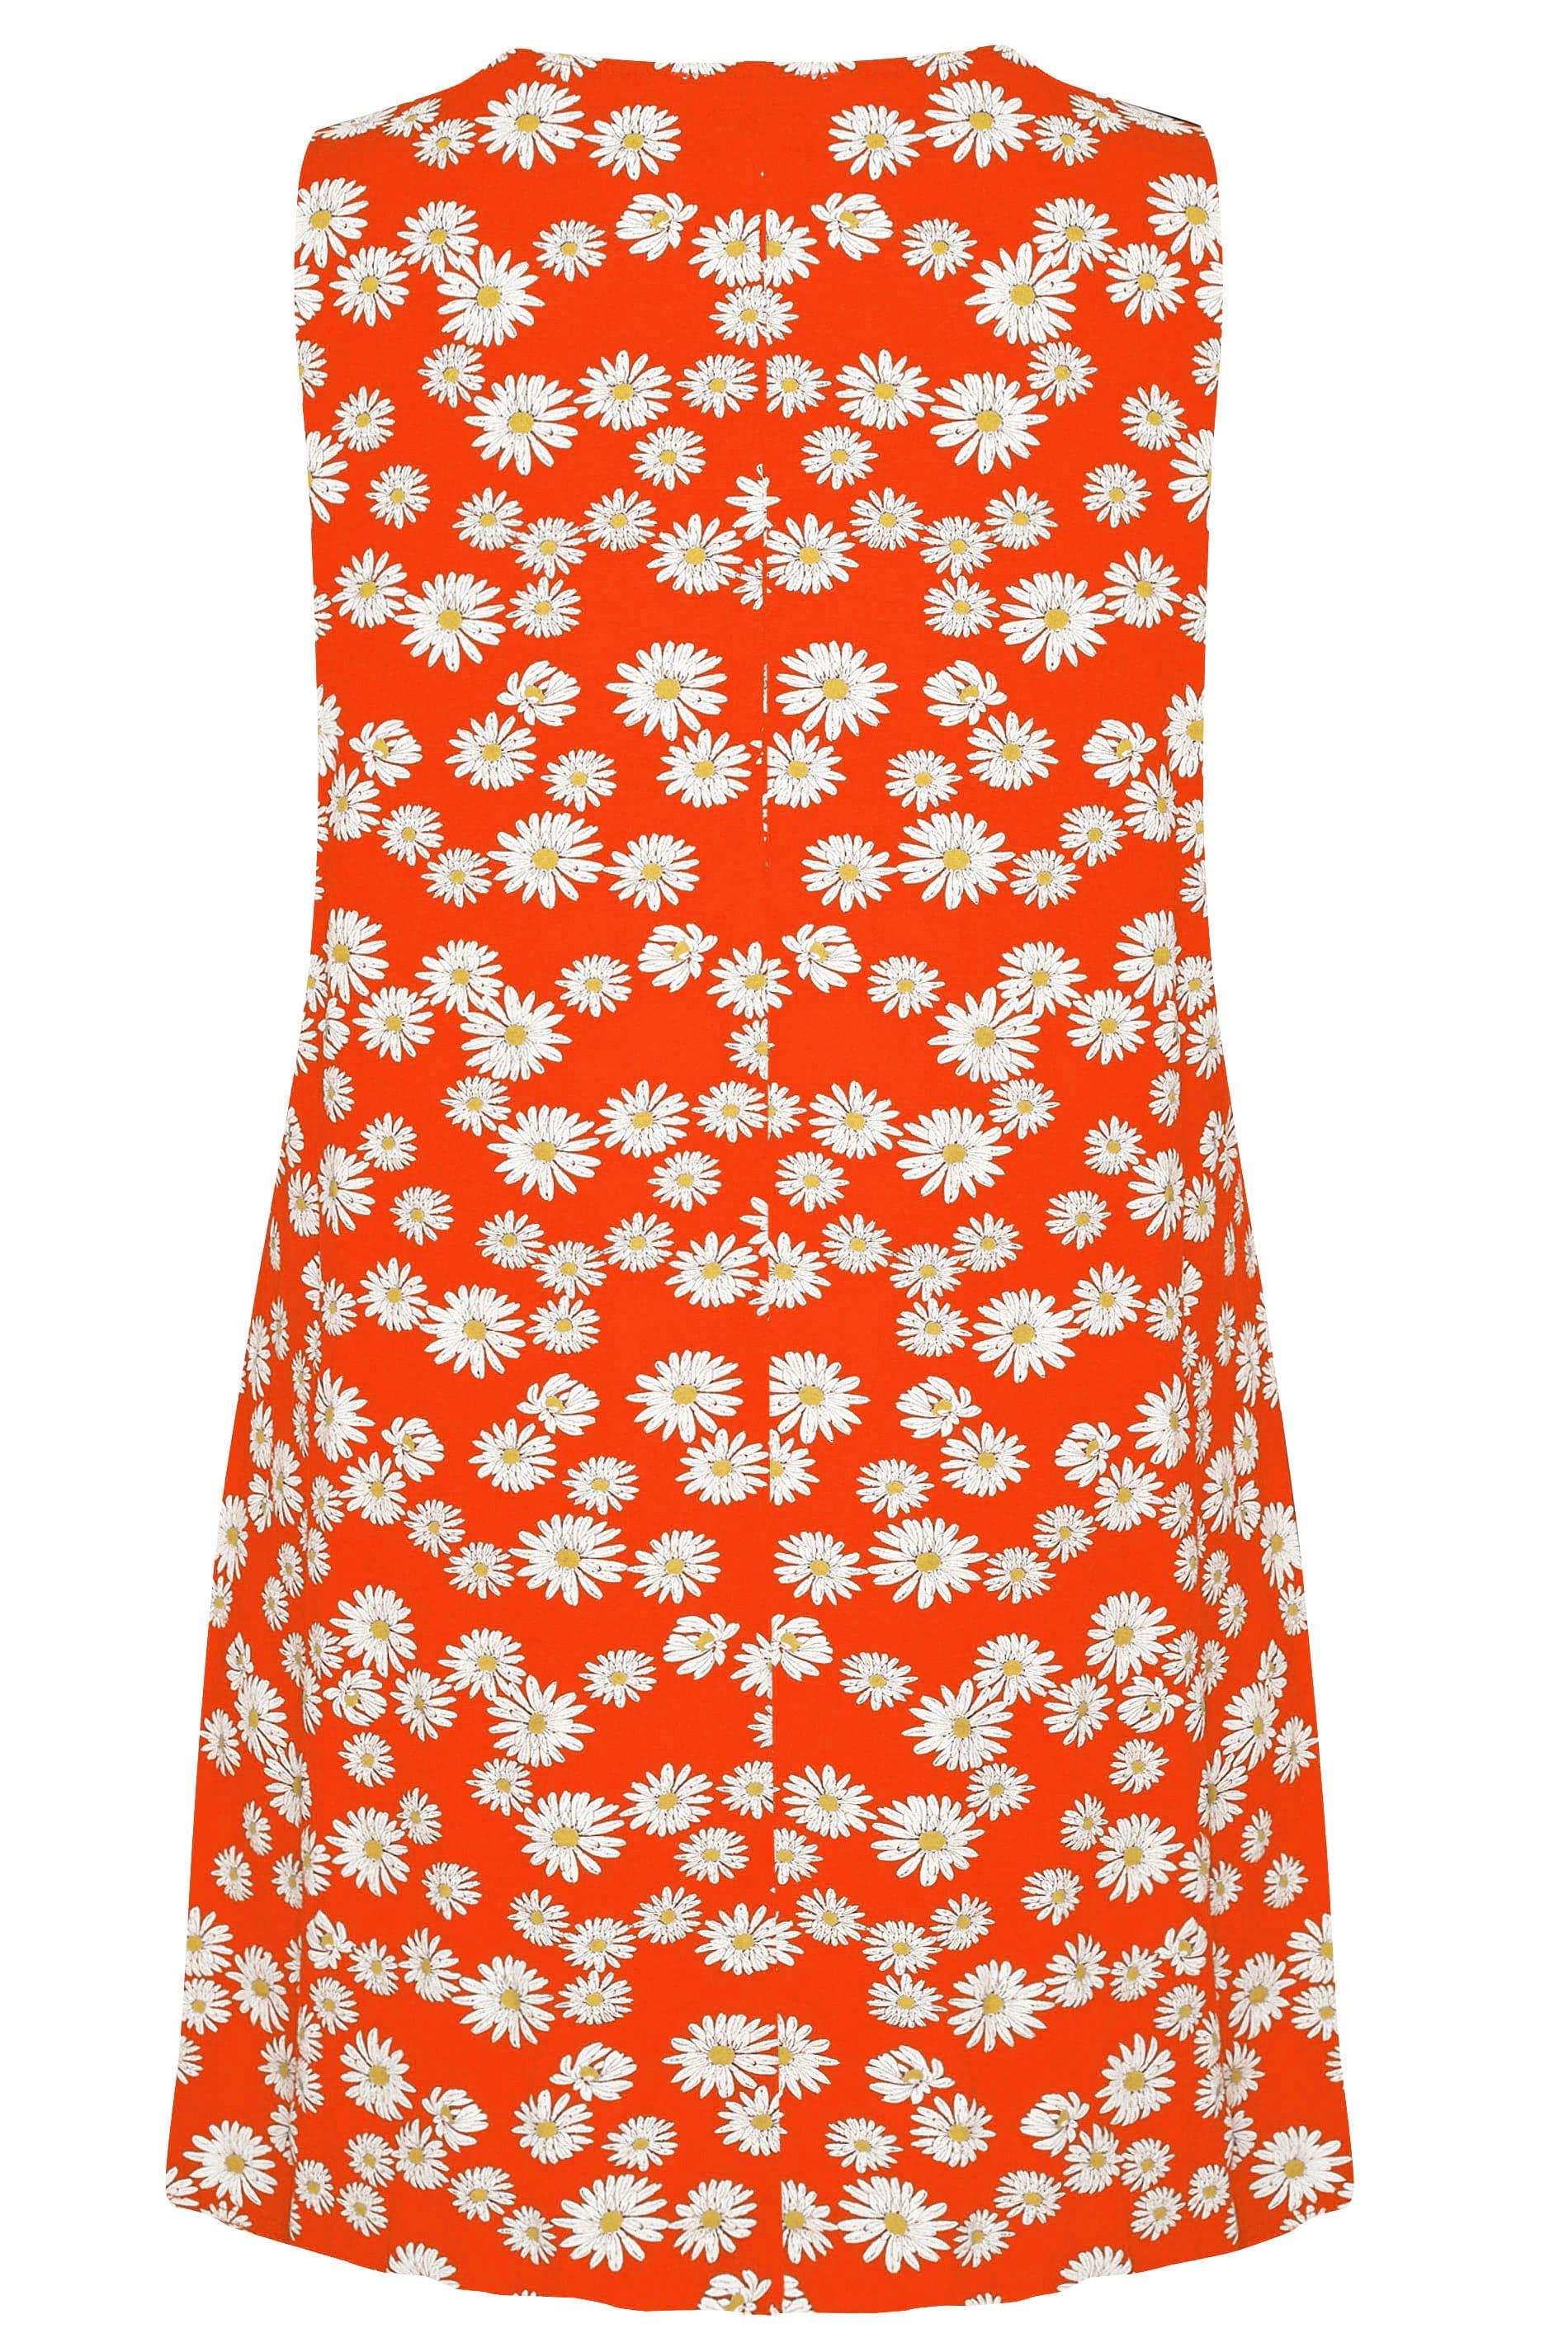 Dark Orange Floral Daisy Swing Vest Top | Sizes 16 to 36 | Yours Clothing